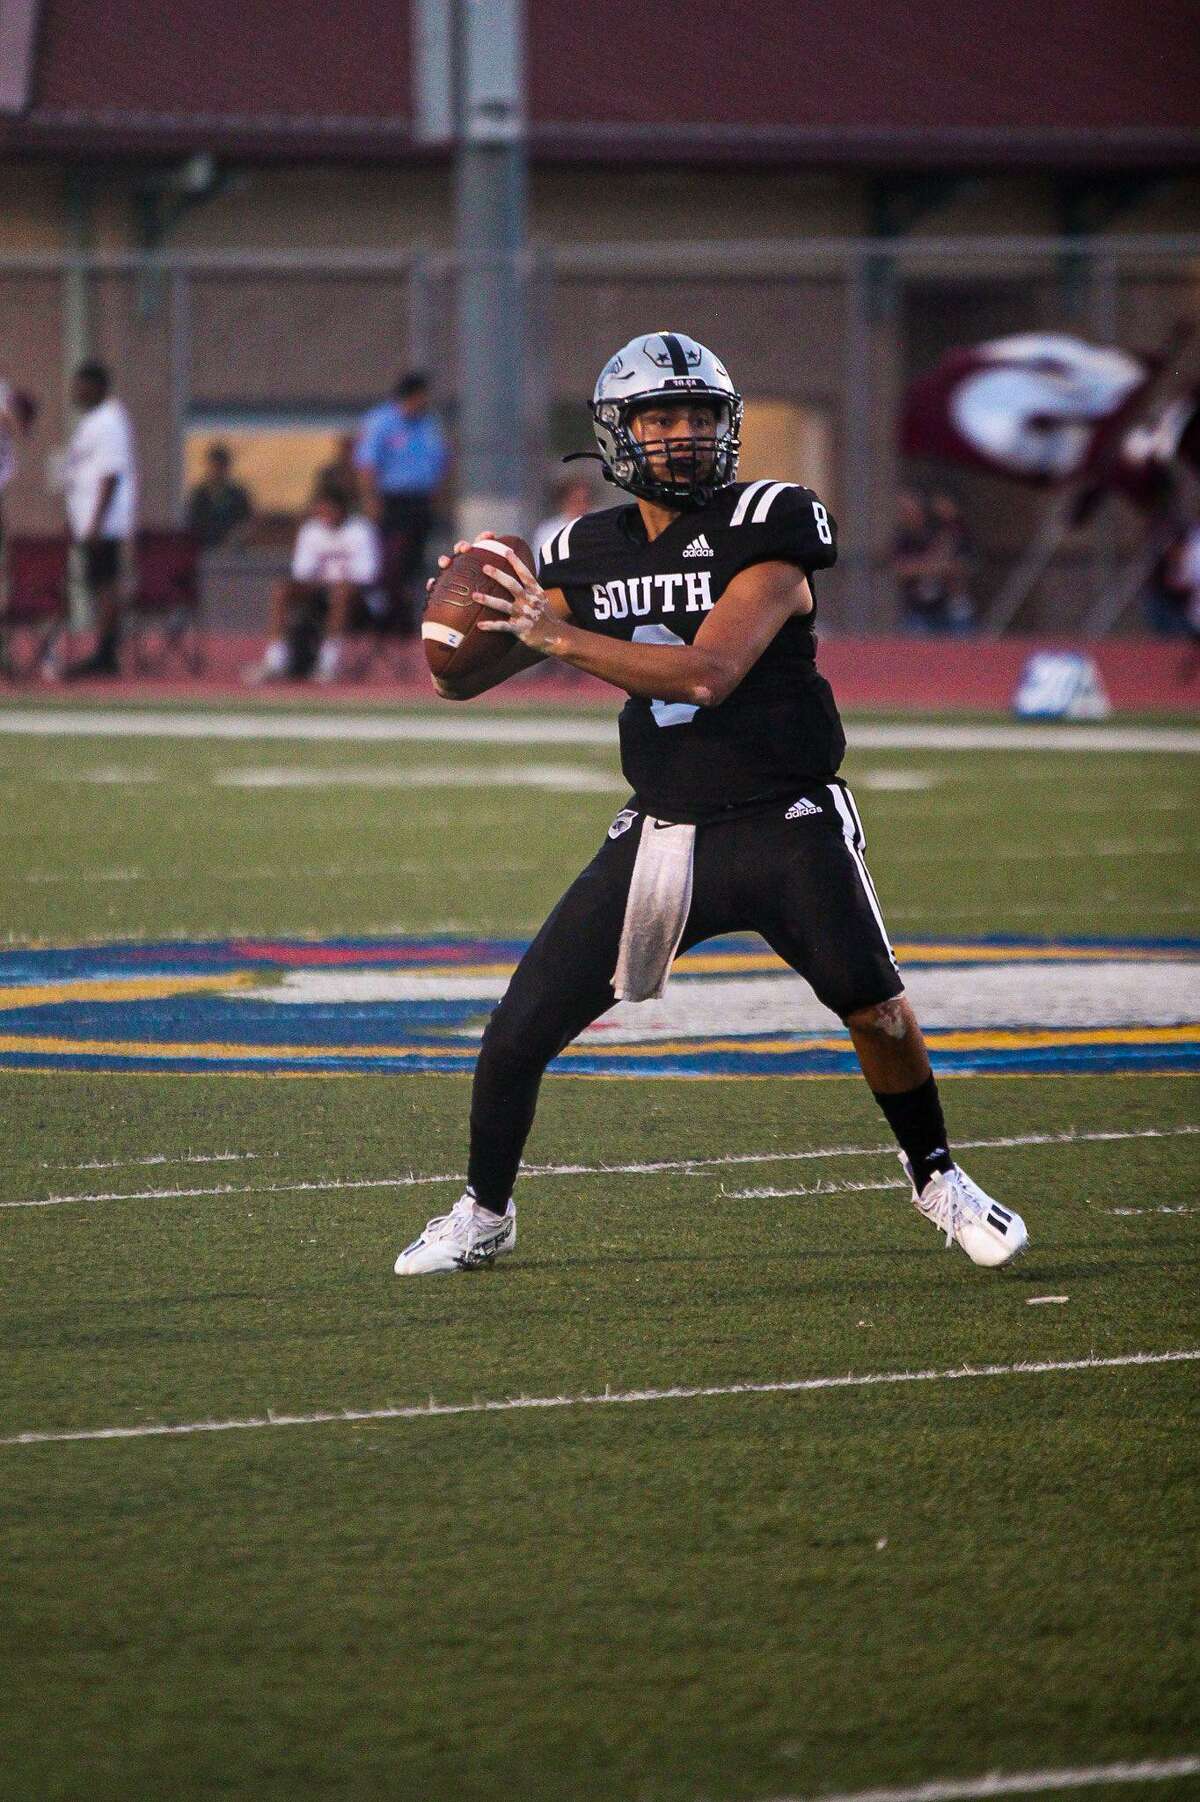 United South quarterback Luis Cisneros drops back for a pass during a game against Flour Bluff on September 2, 2022 at the Bill Johnson Student Activity Complex.